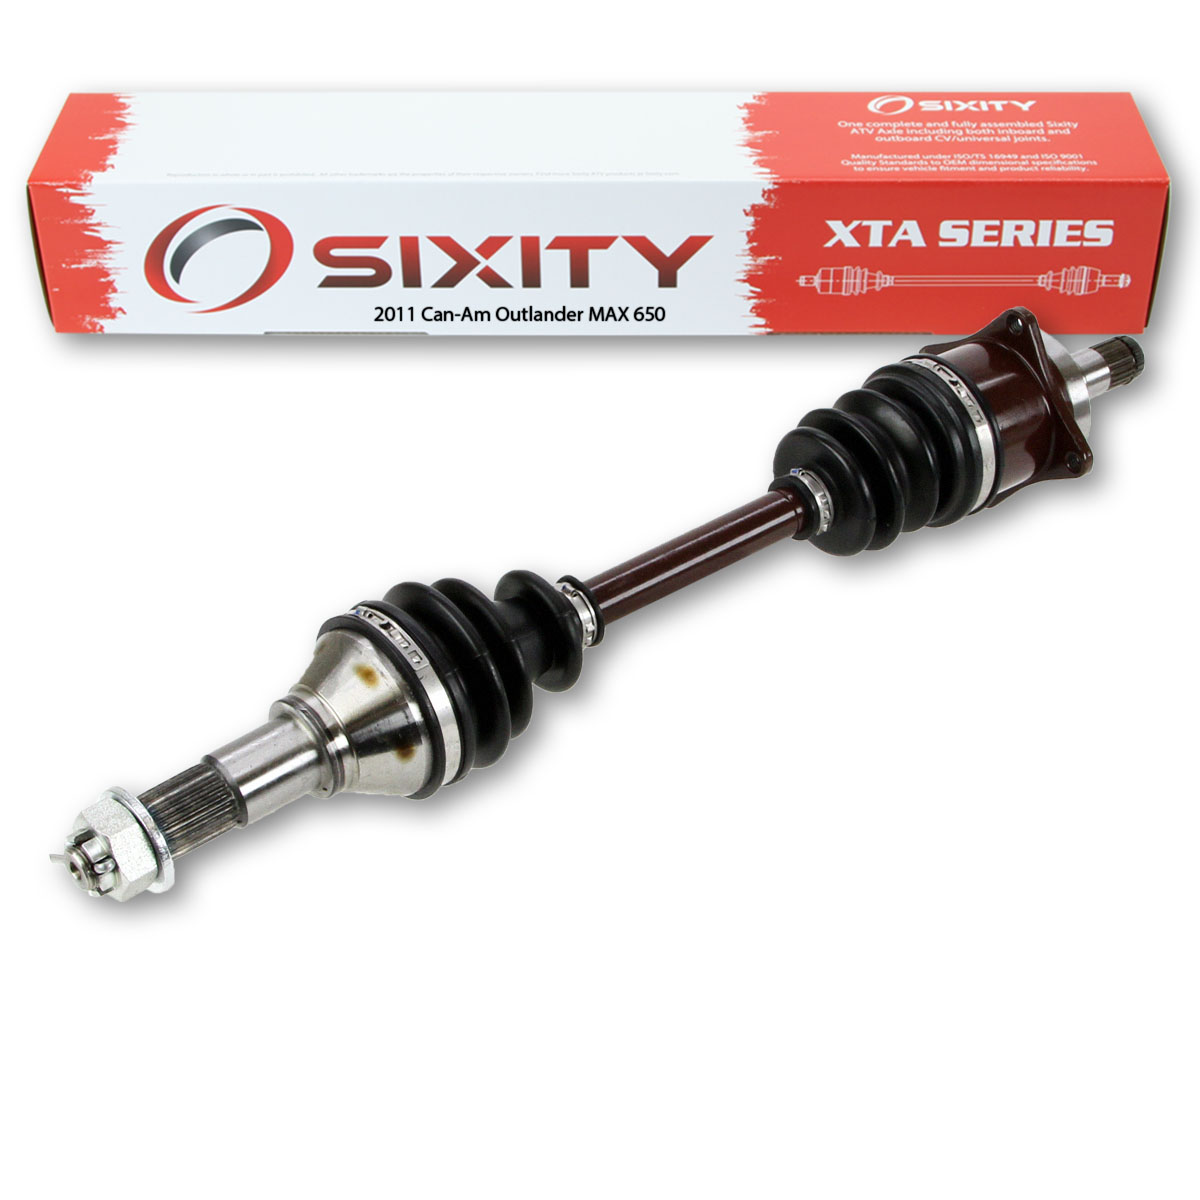 Sixity 2011 Can-Am Outlander MAX 650 4X4 Front Left XTA ATV Axle